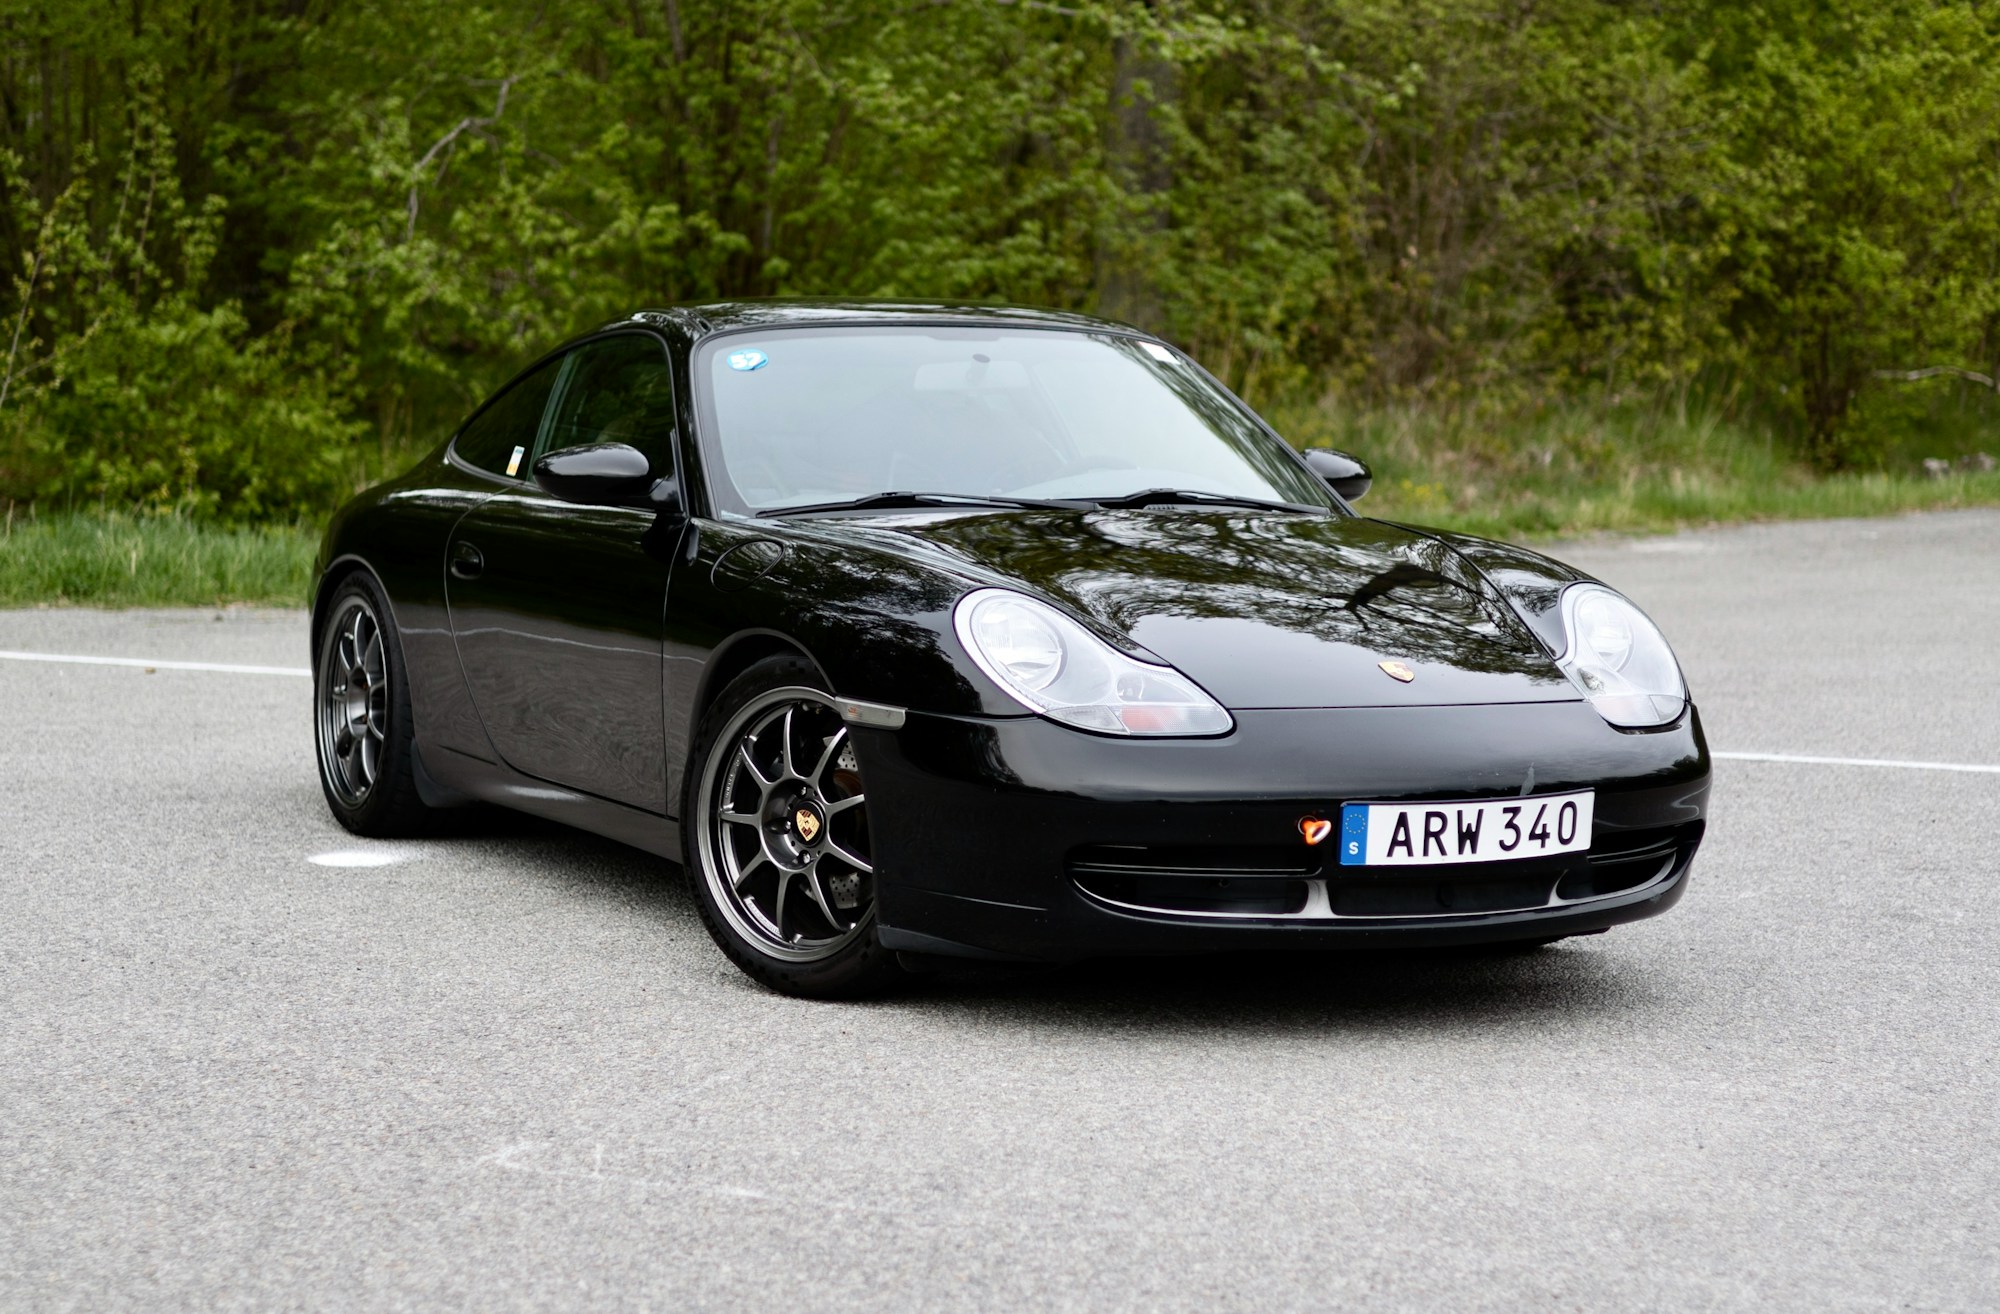 1998 PORSCHE 911 (996) CARRERA - TRACK PREPARED for sale by auction in  Stockholm, Sweden